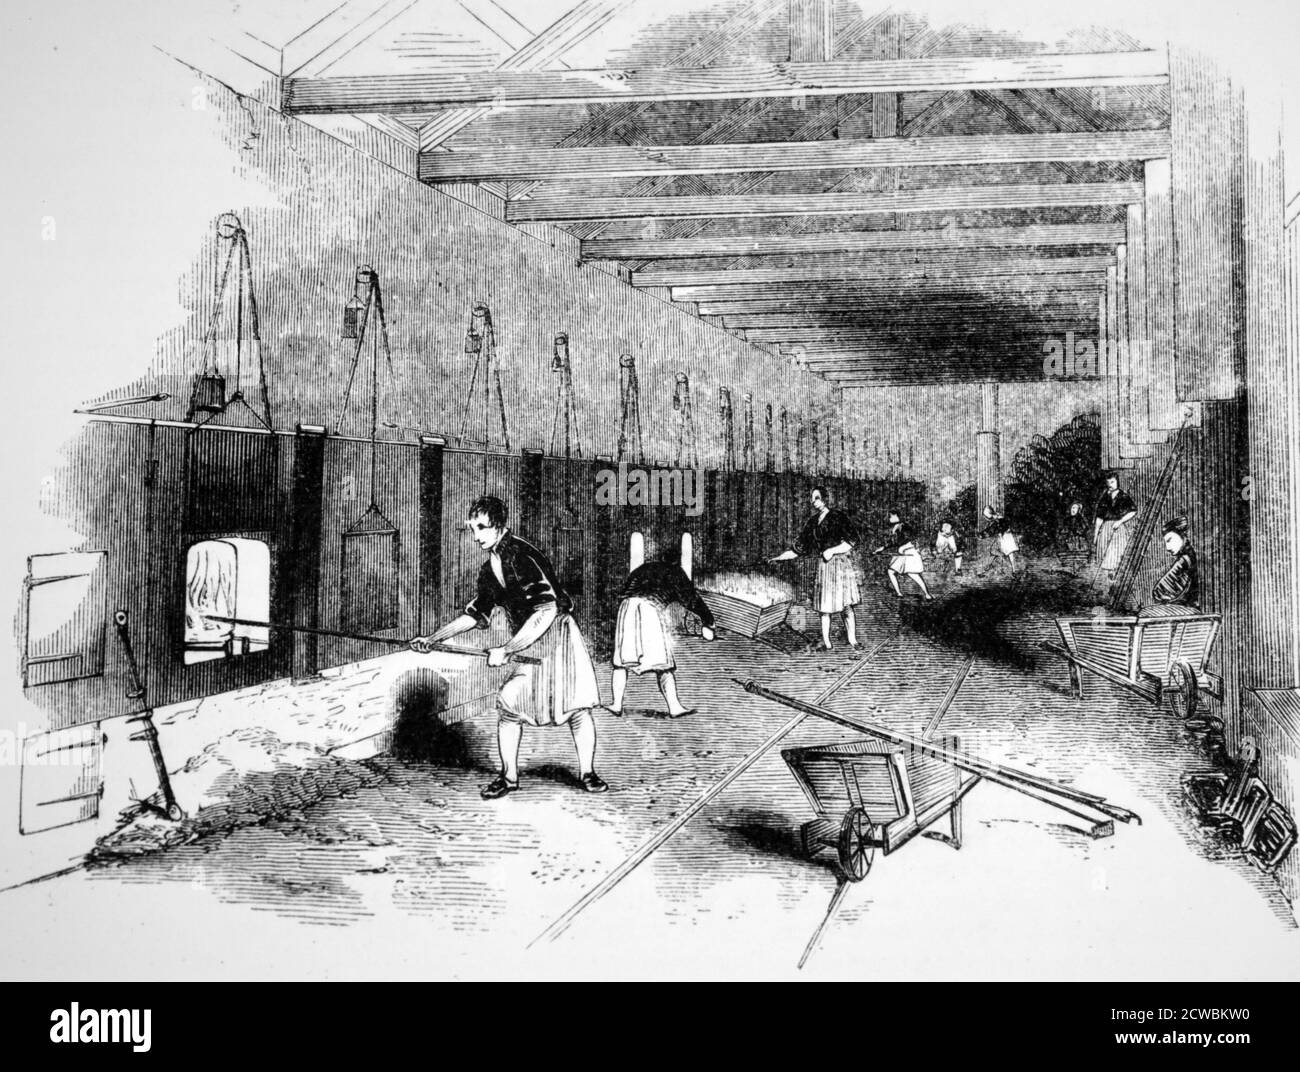 Engraving depicting the production of sodium carbonate. Sodium sulphate is mixed with lime and coal, heated in furnaces to produce sodium carbonate: Felling Chemical Works, Newcastle. Stock Photo